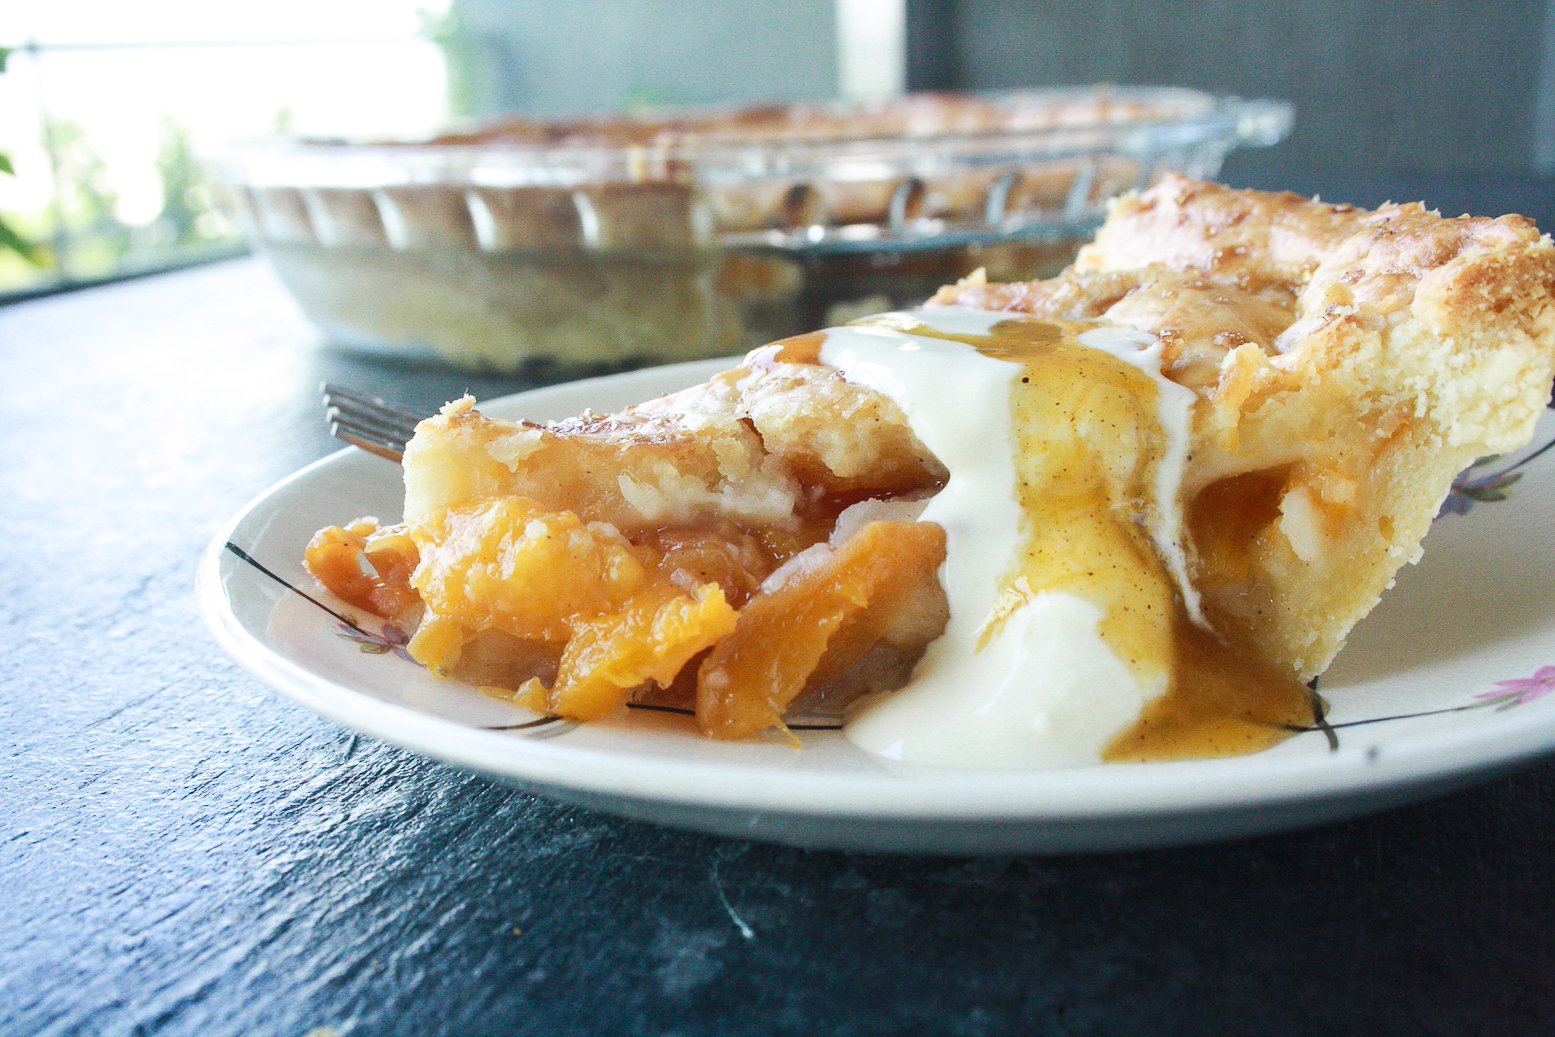 Juicy peaches inside a buttery, flaky pie crust made from-scratch!